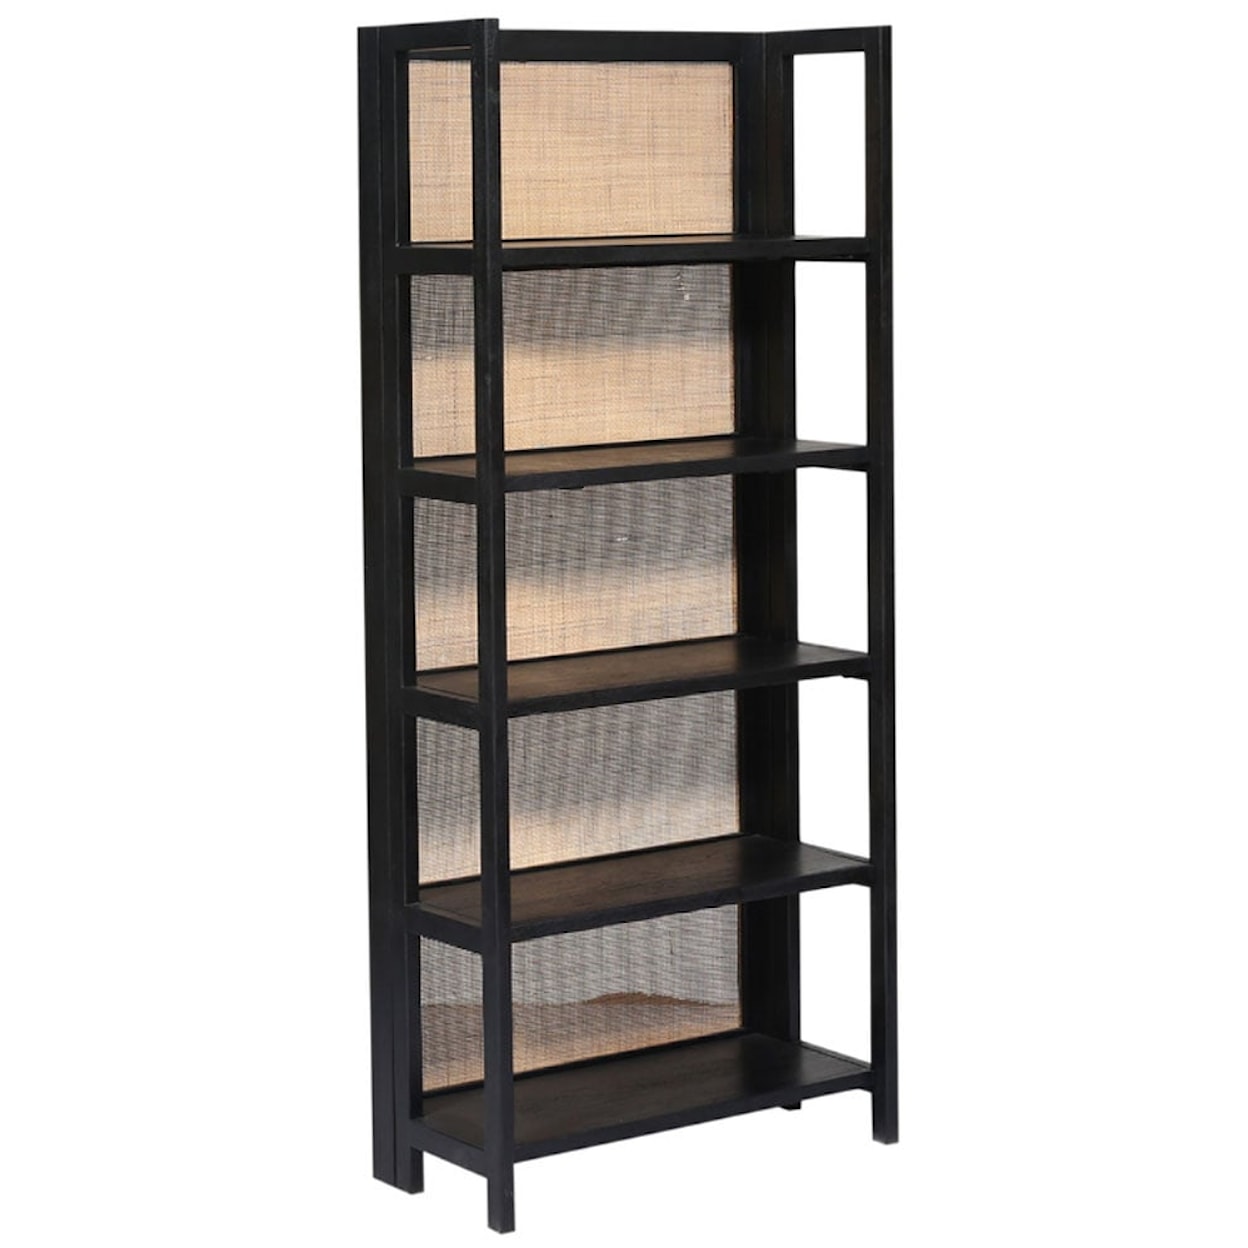 Signature Design by Ashley Abyard Bookcase